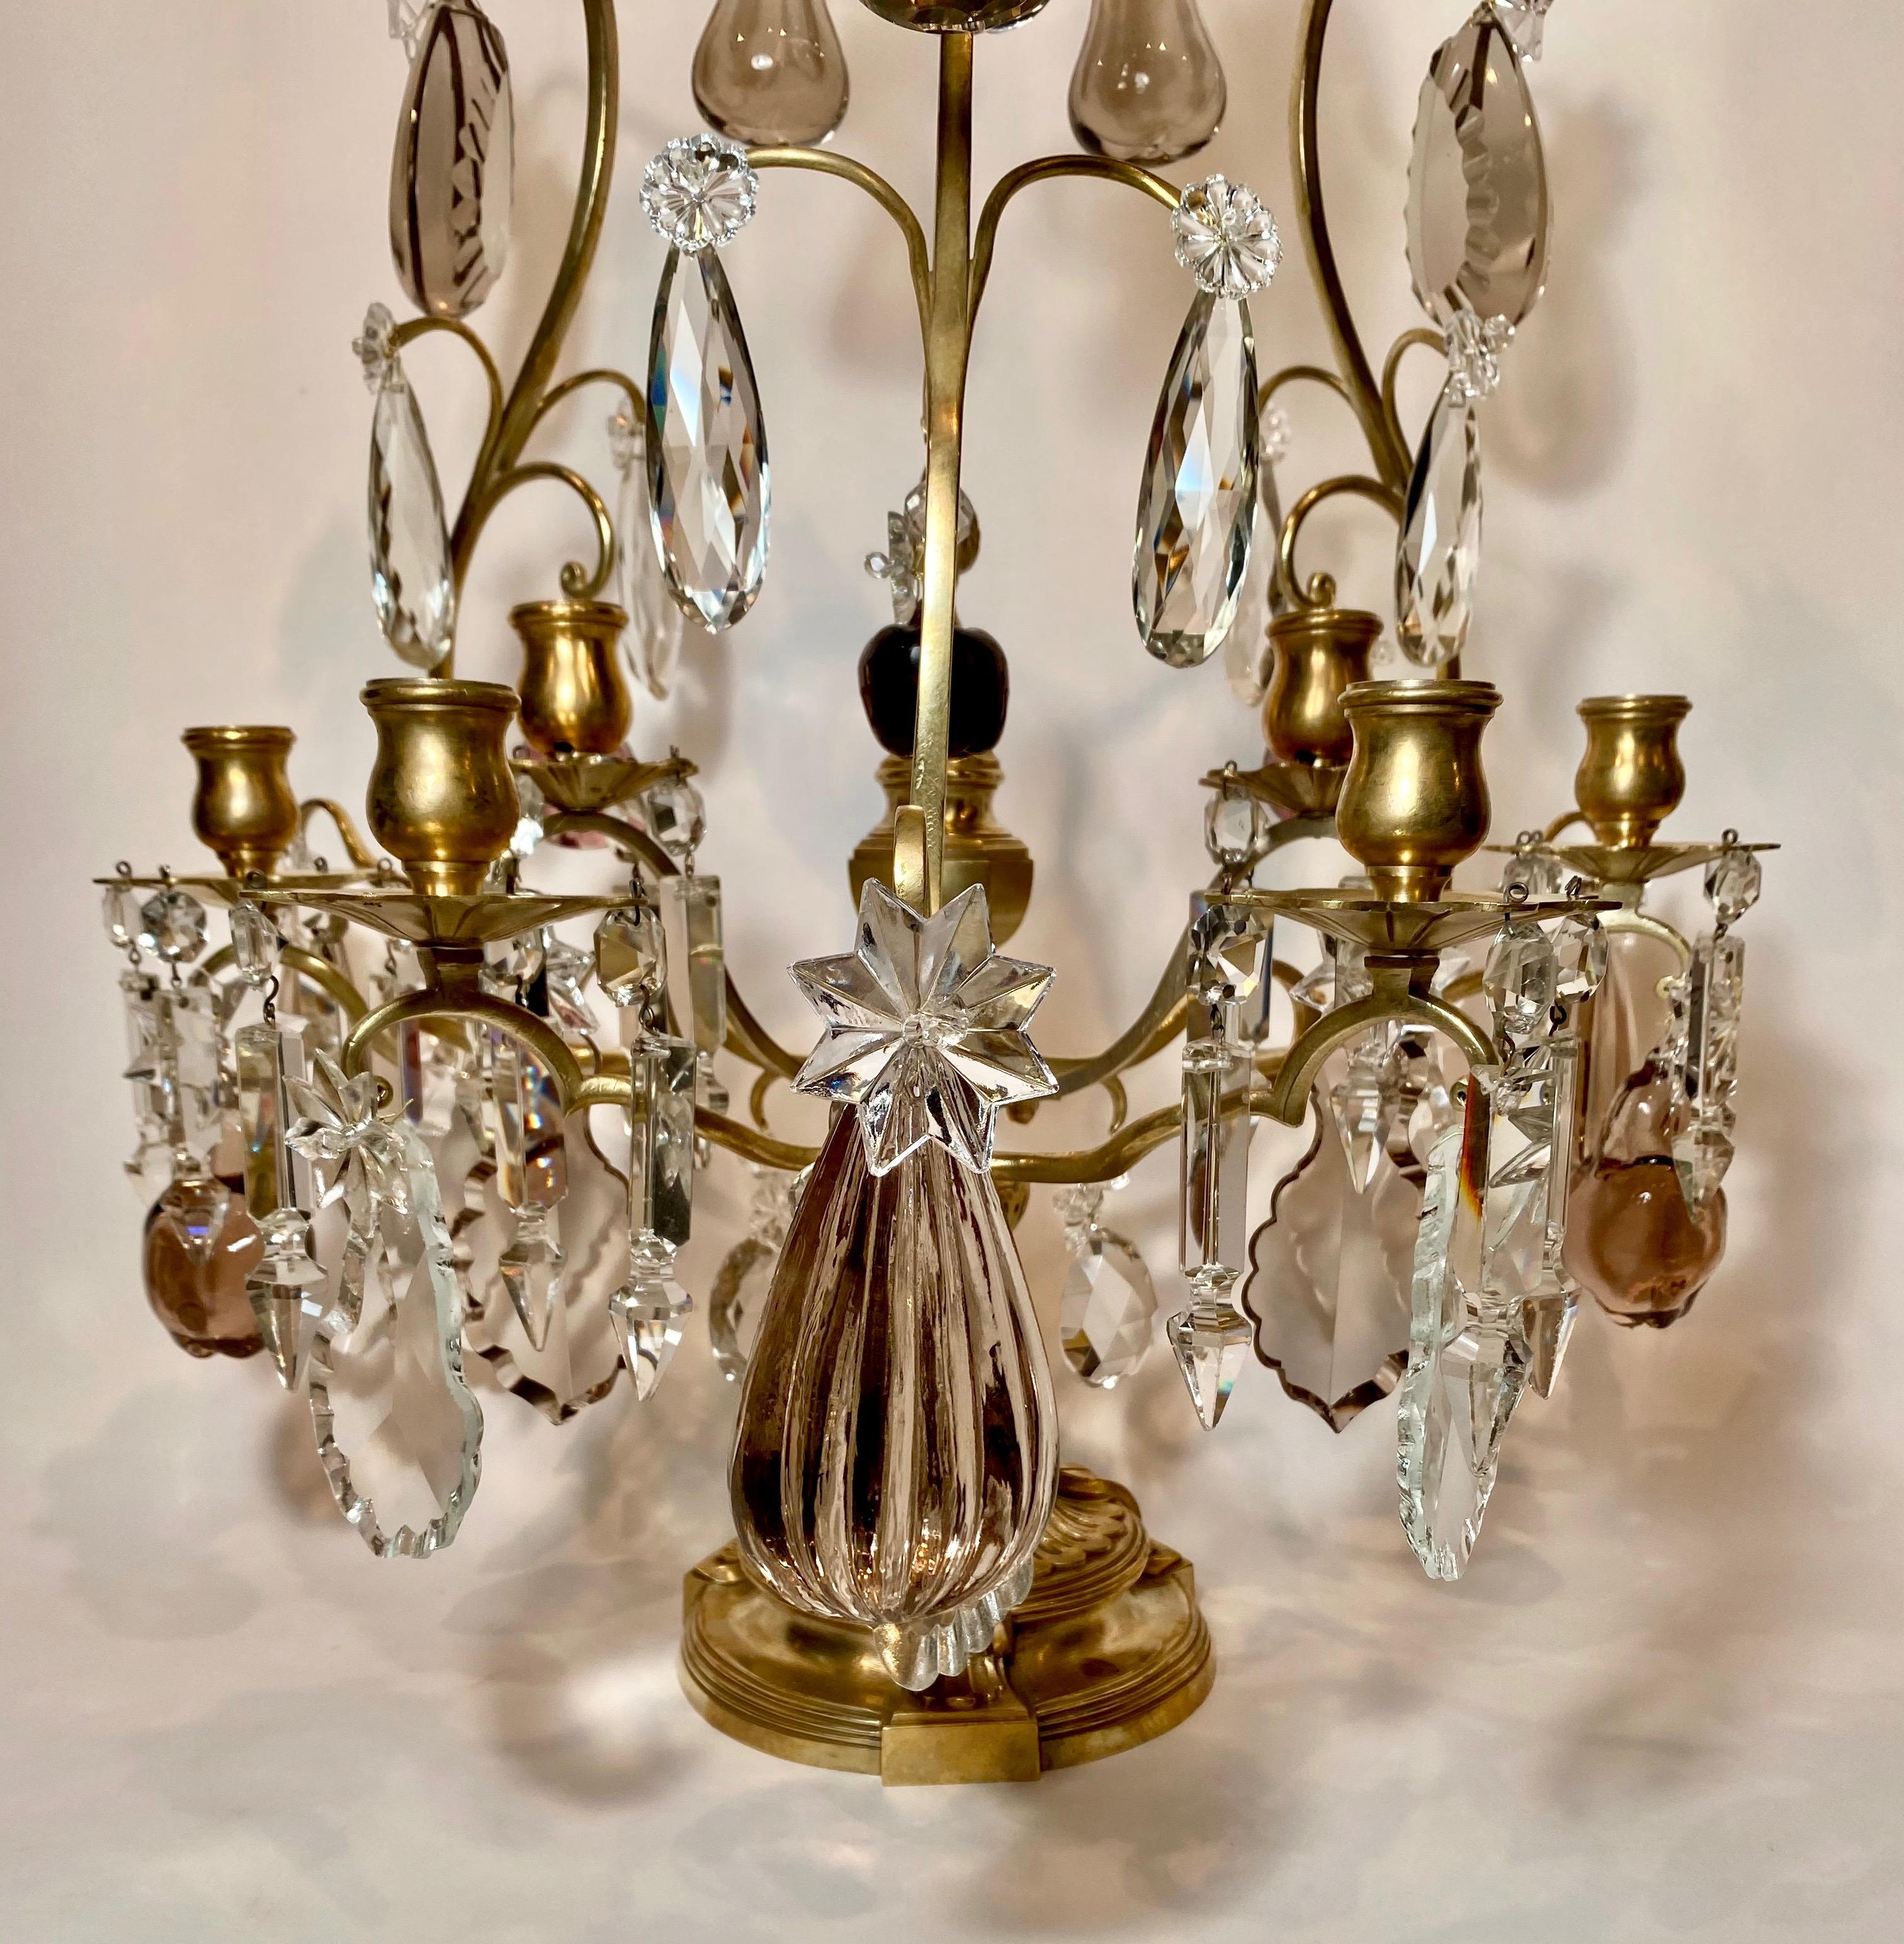 Pair of antique French Baccarat and bronze Lyre Girondolles, circa 1875-1885.

       